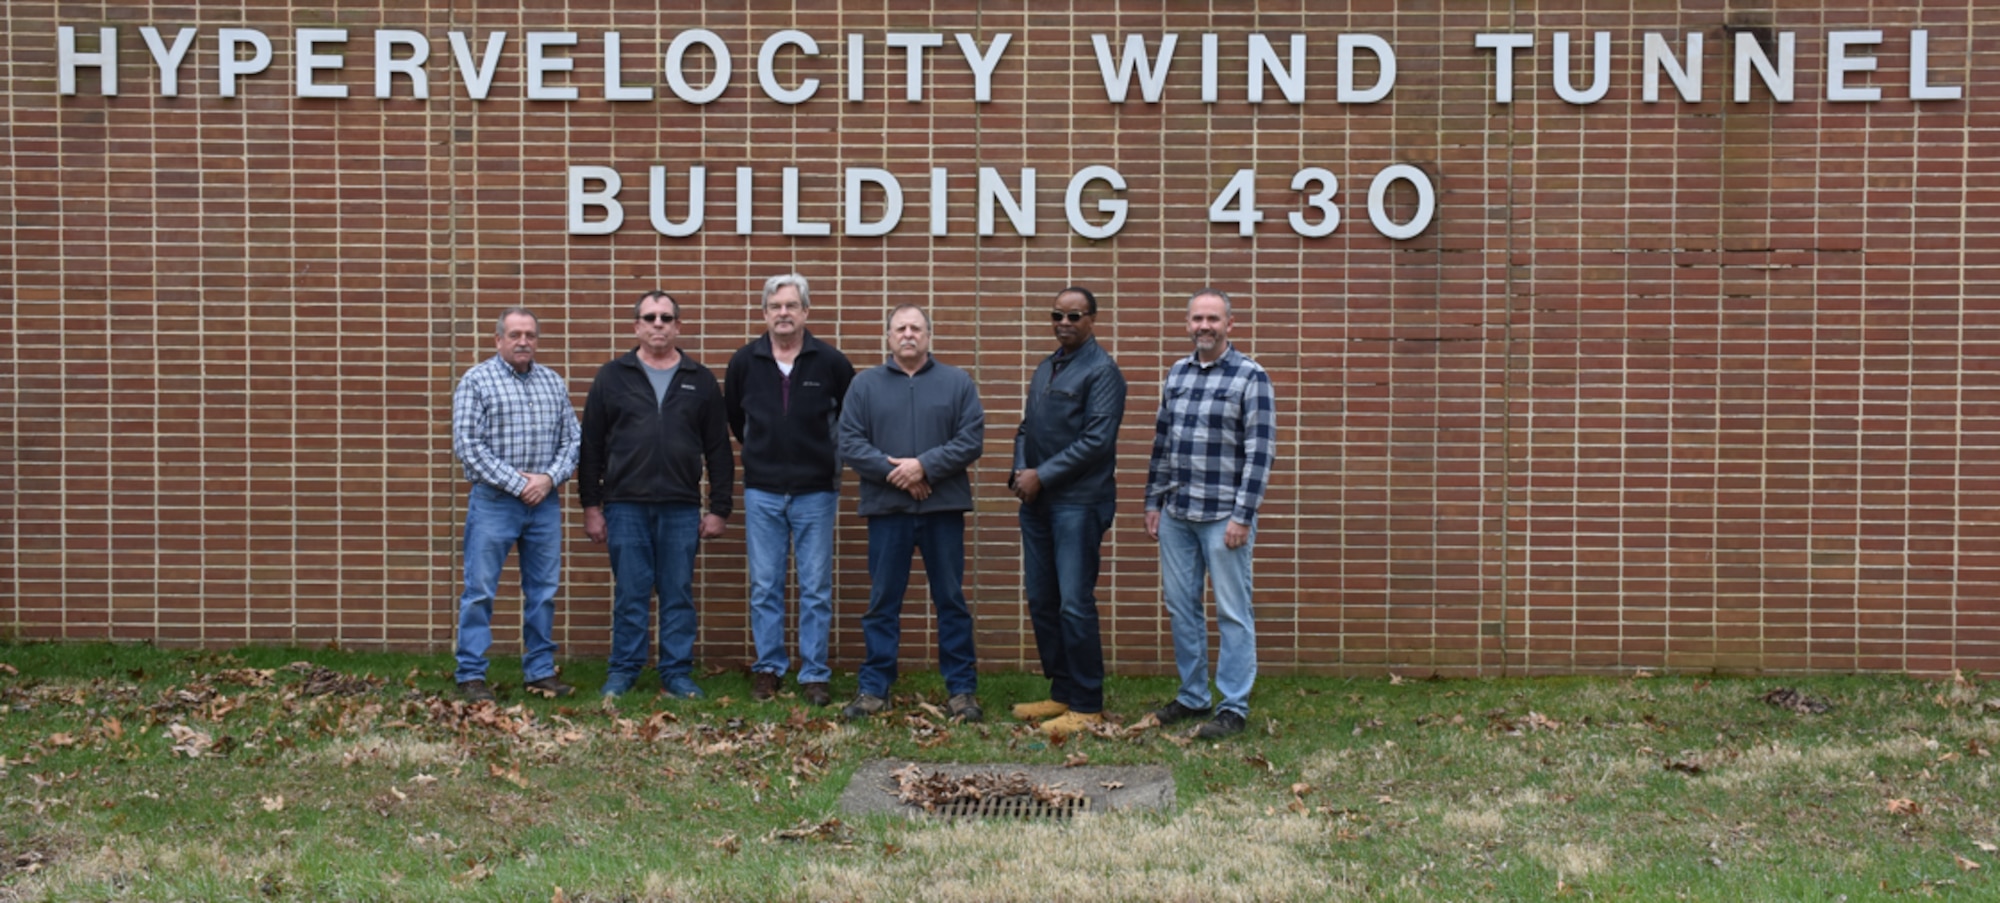 The White Oak Rescue Team (WORT) was established in the late 1990s at Arnold Engineering Development Complex Hypervelocity Wind Tunnel 9 in White Oak, Maryland, to provide immediate lifesaving actions in the event of an emergency until county emergency responders arrive onsite. Pictured are members of the original WORT who are still employed at Tunnel 9. From left are Terry Mullin, William Betz, Raymond Schlegel, Chester DiBenedetto, Arnold Collier and AEDC White Oak Site Director Joe Coblish. (U.S. Air Force photo by Addison Spicer)